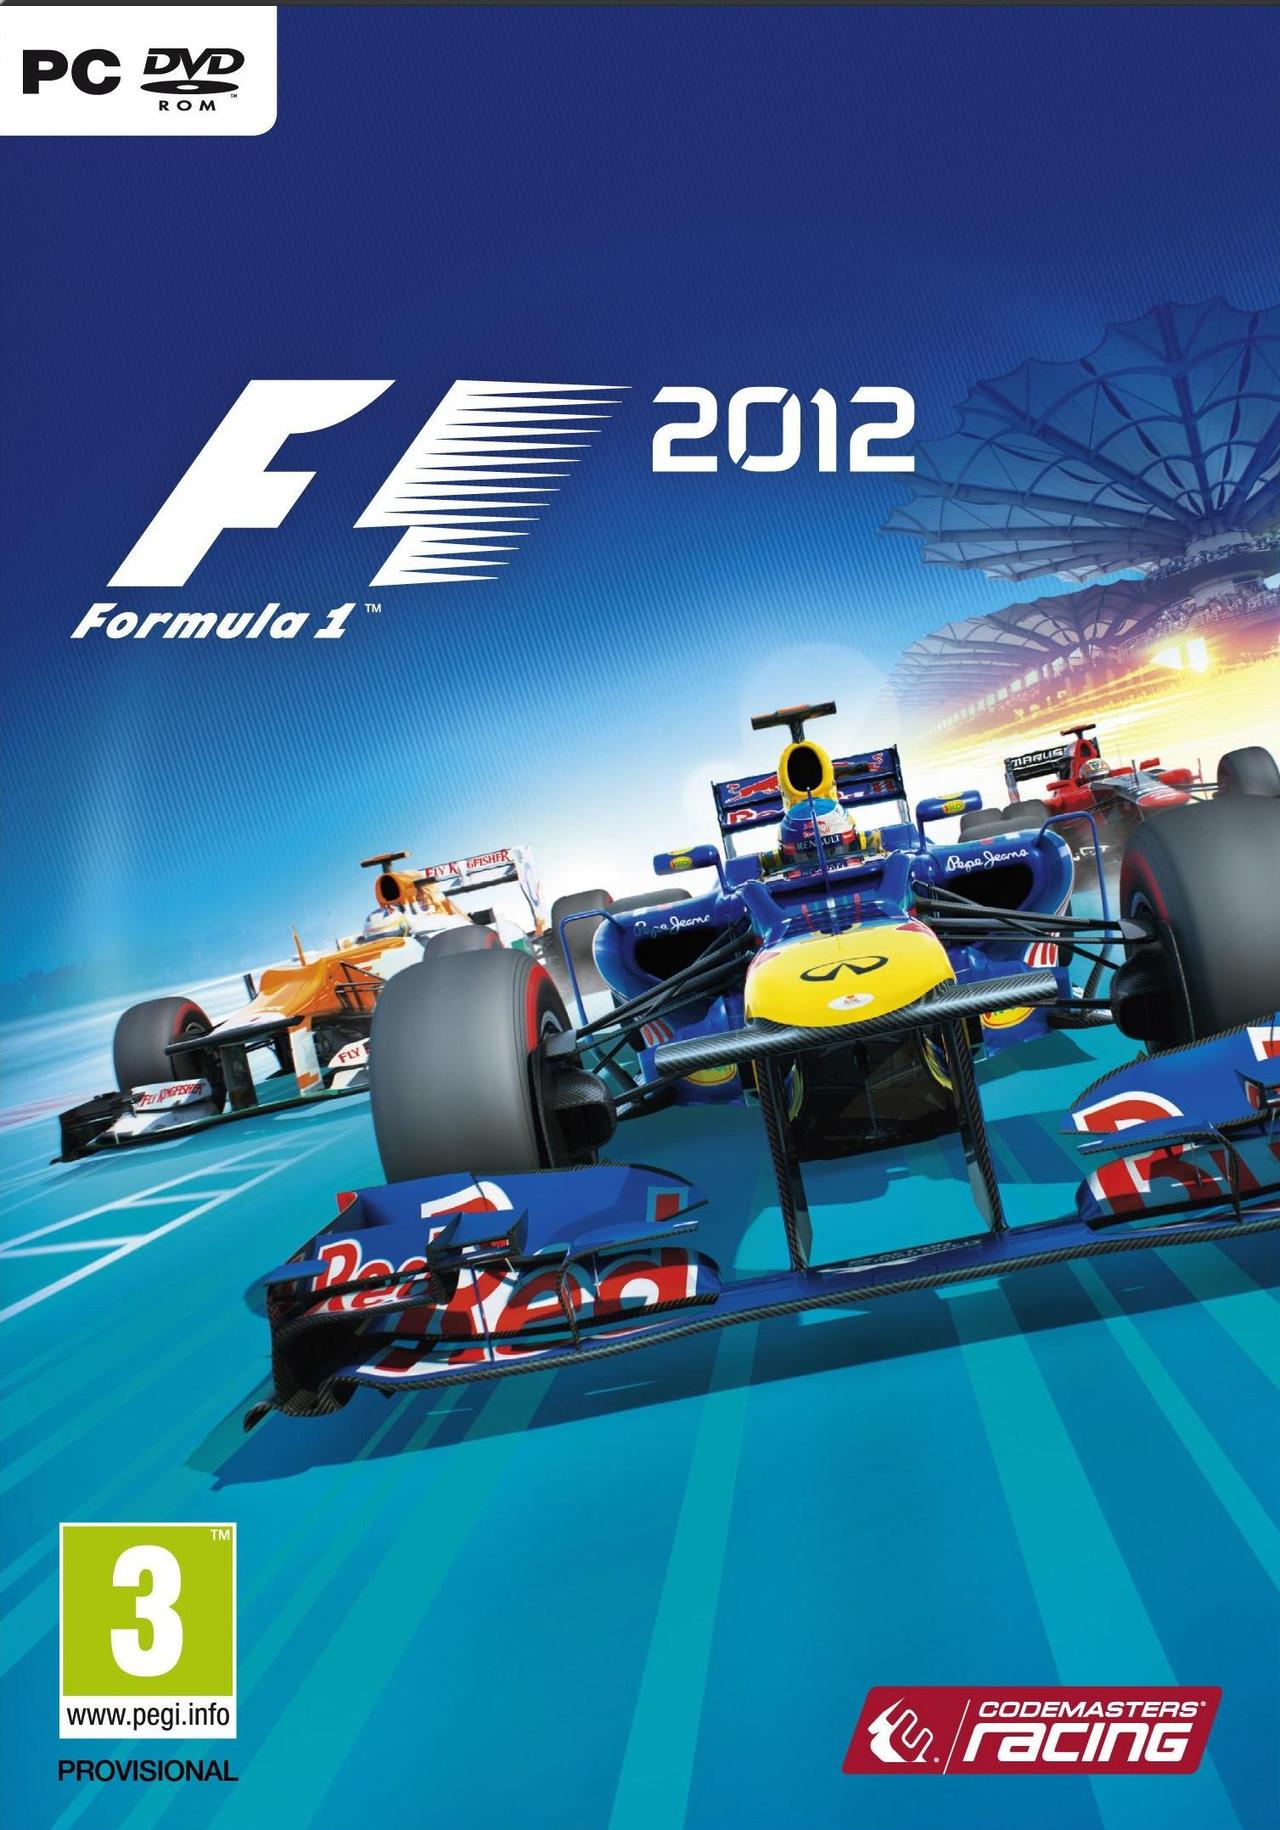 F1 2012 [PC|FRENCH] (Exclue) [Multi]